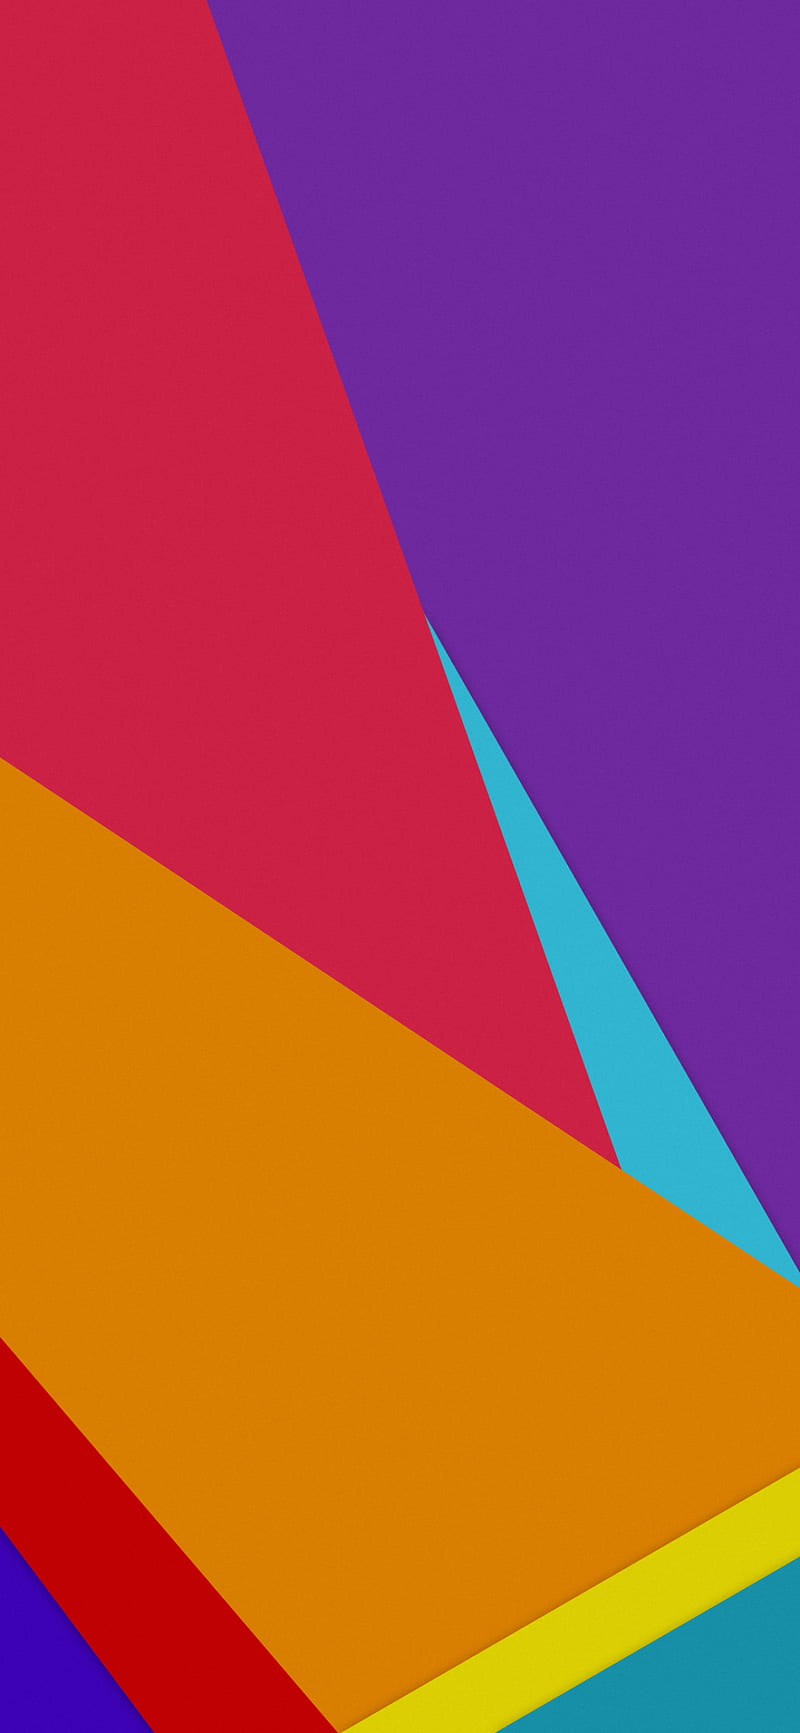 Material Design , Multicolor, Colorful, Minimalist, Stripes, Flat, Abstract, HD phone wallpaper